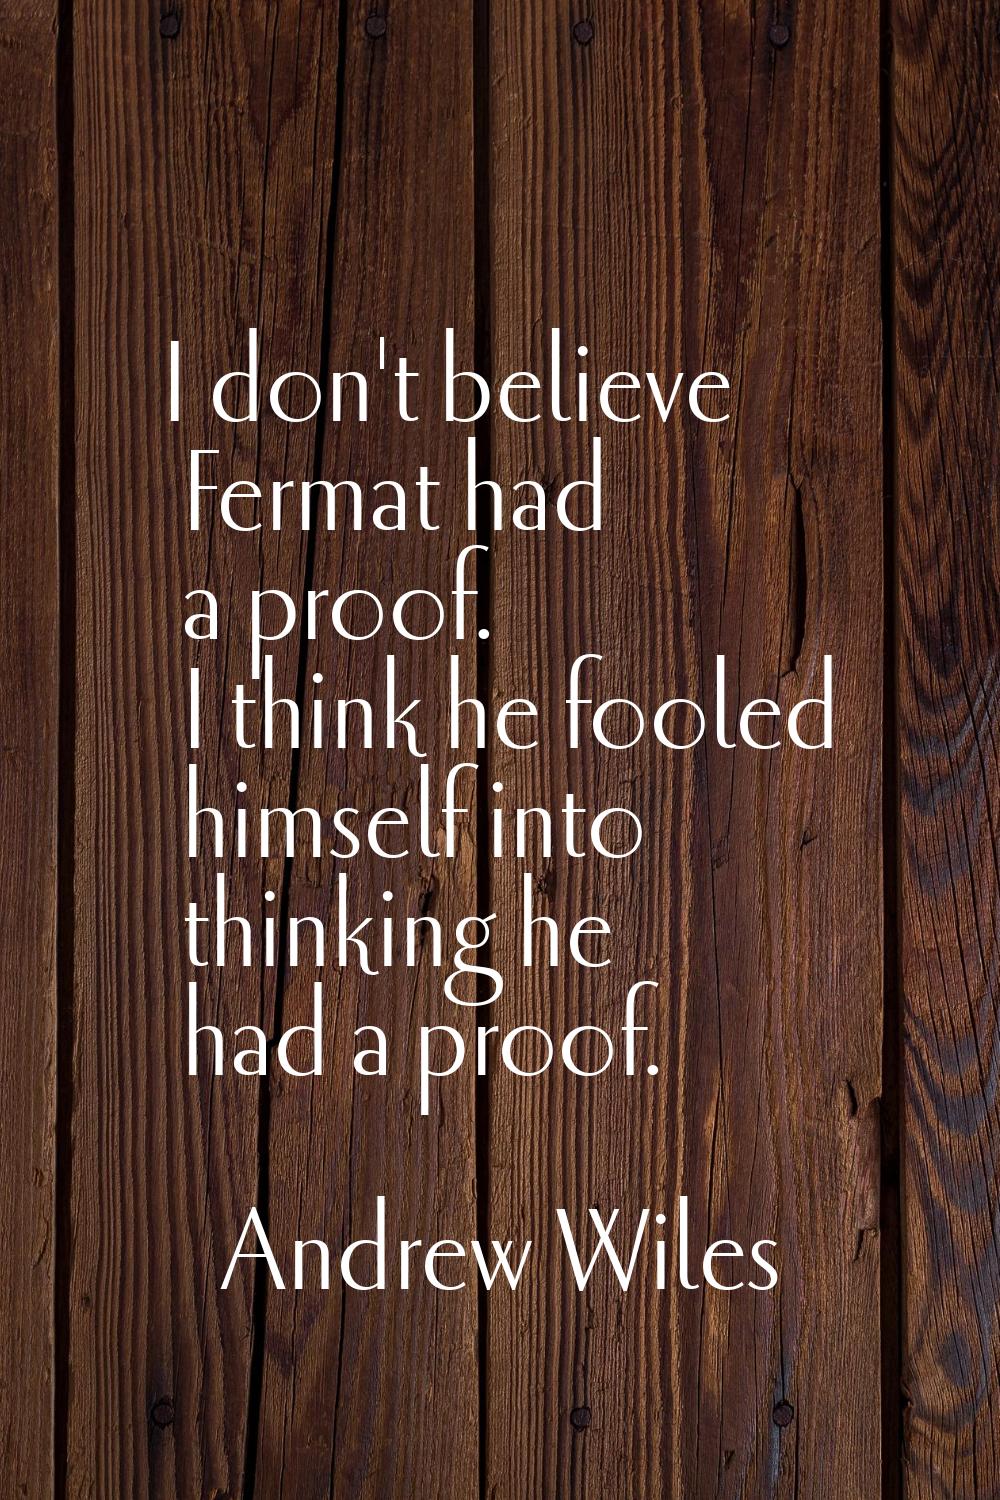 I don't believe Fermat had a proof. I think he fooled himself into thinking he had a proof.